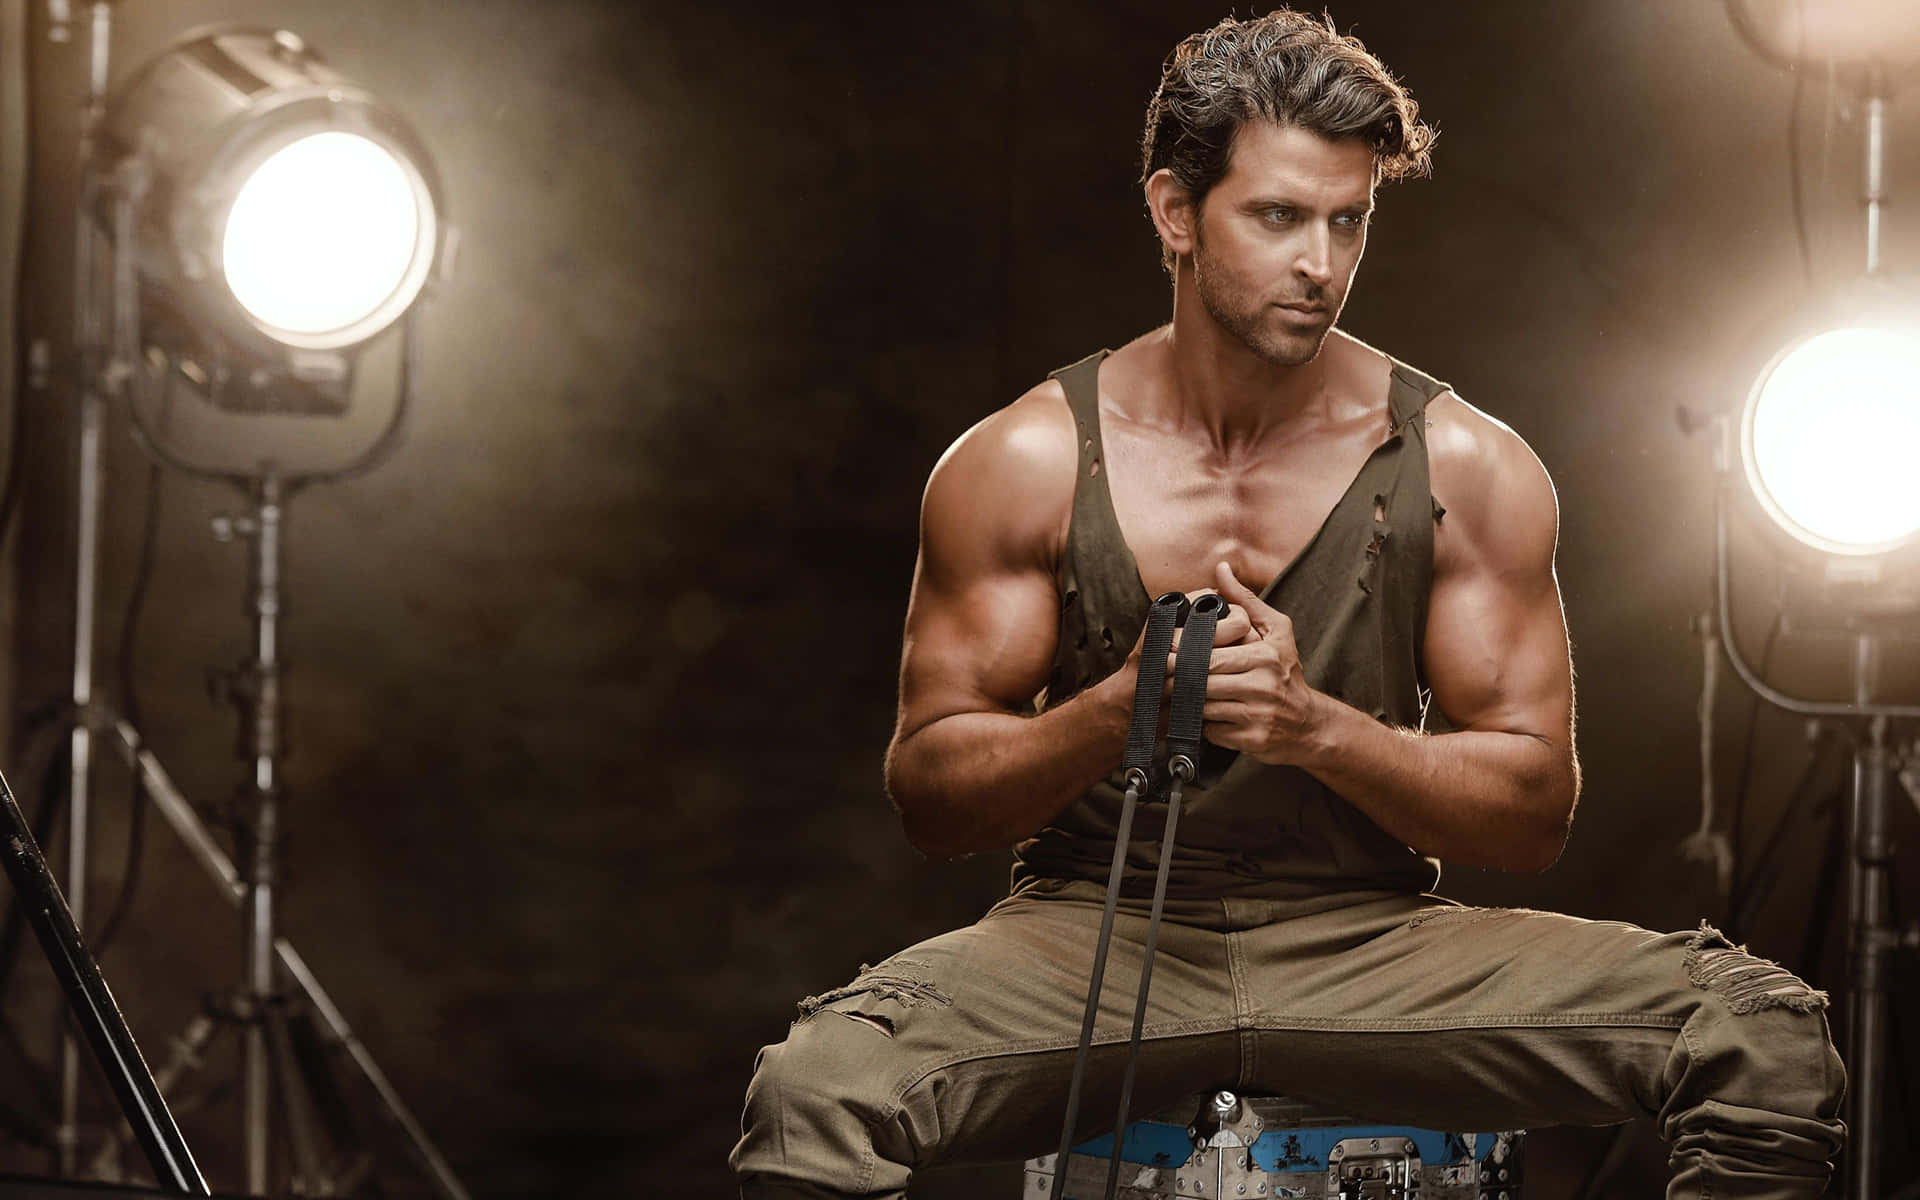 Hrithik Roshan In A Studio With Lights